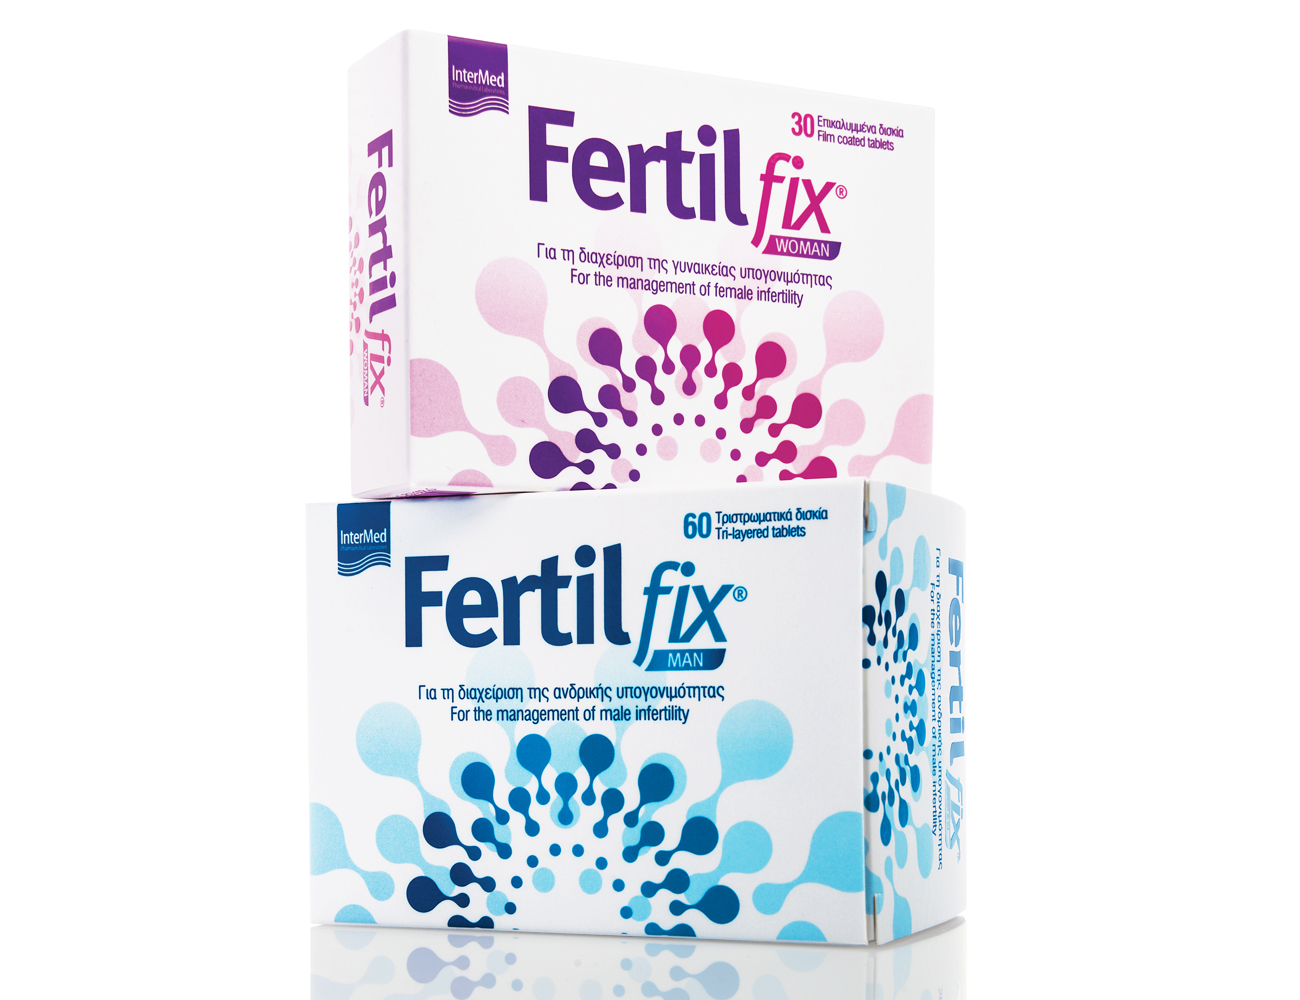 FERTILFIX® Man & Woman (For the management of male and female infertility)